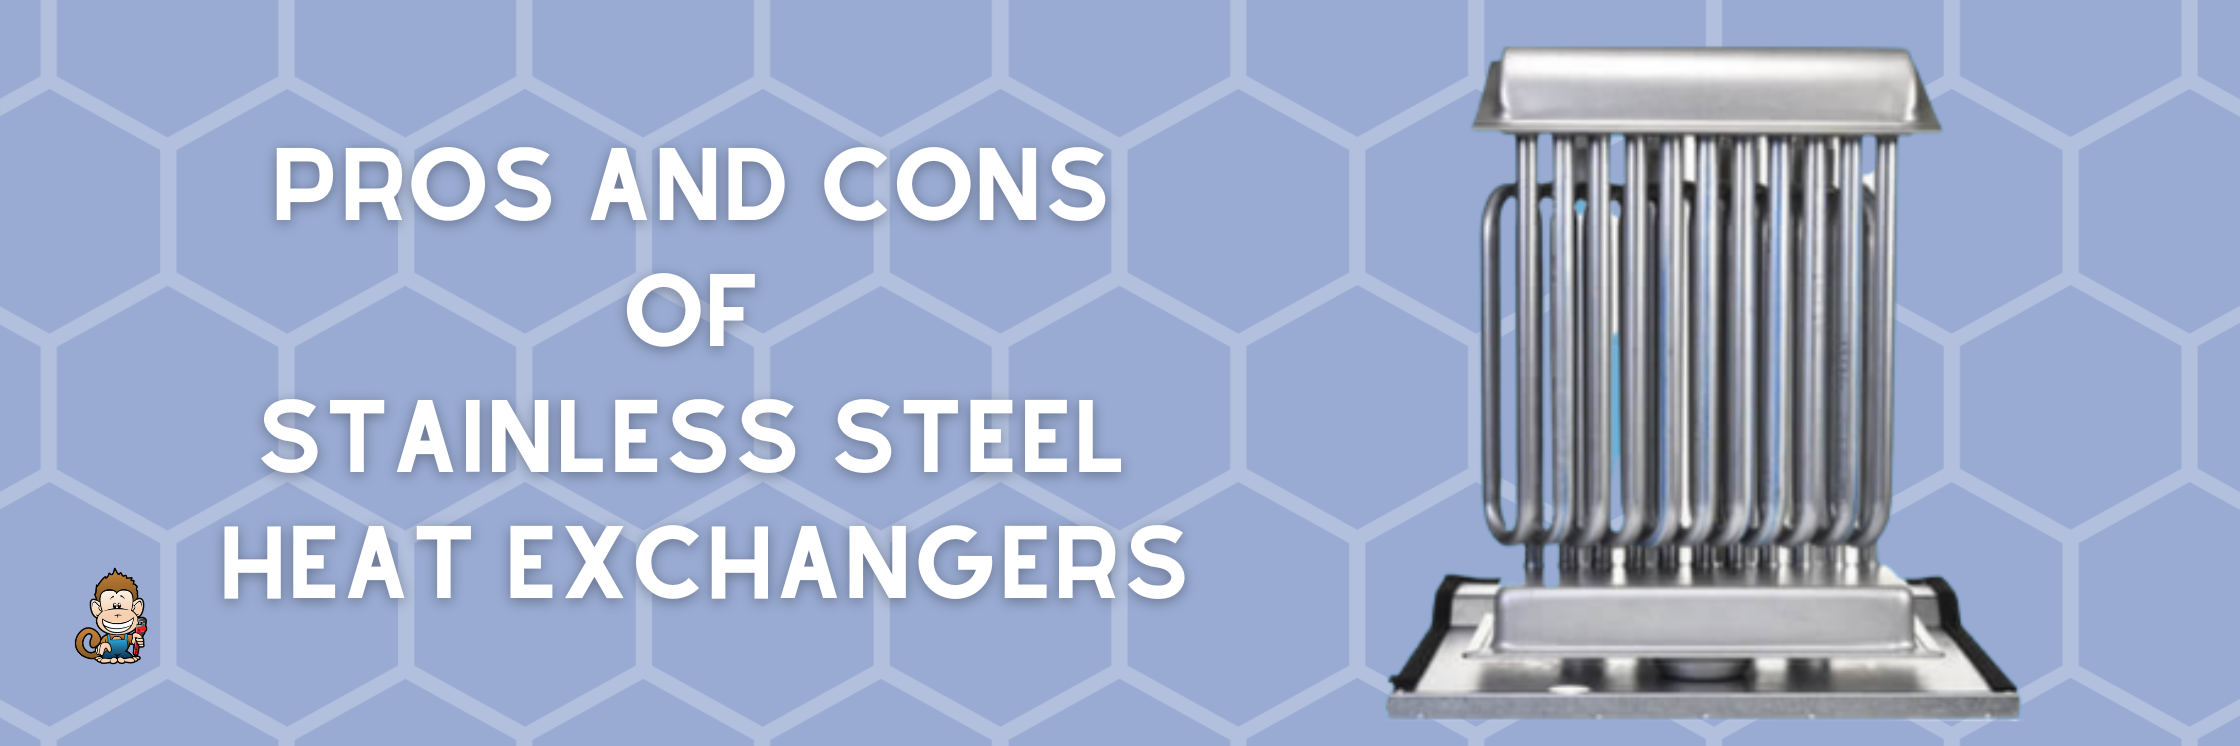 Pros and Cons of Stainless Steel Heat Exchangers